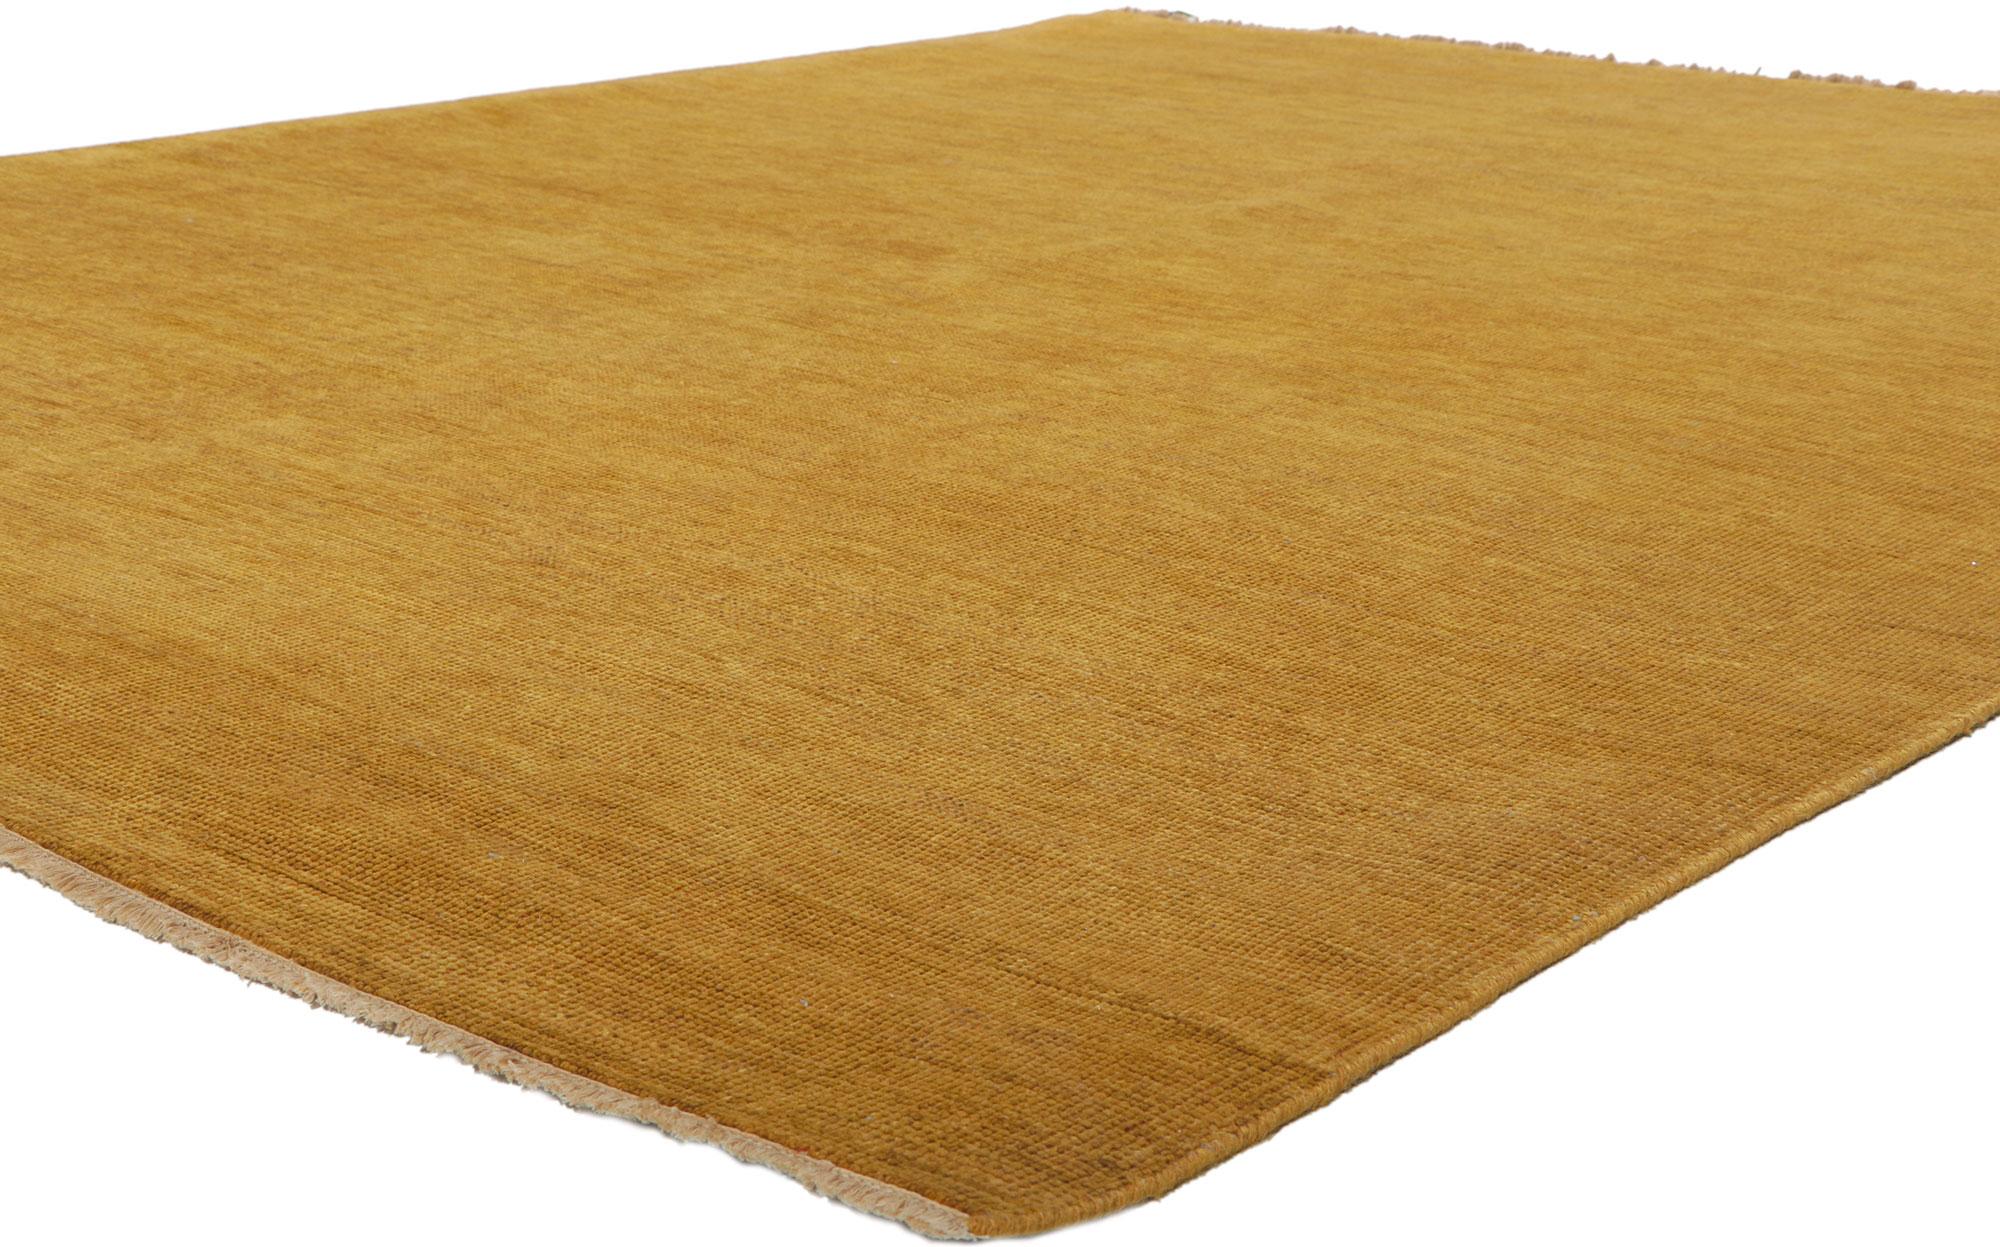 30859 New Contemporary Solid Rug with Modern Tuscan Style 08'00 x 10'00.
Effortless beauty combined with simplicity and modern style, this hand-loom wool contemporary Indian rug provides a feeling of cozy contentment without the clutter. Imbued with